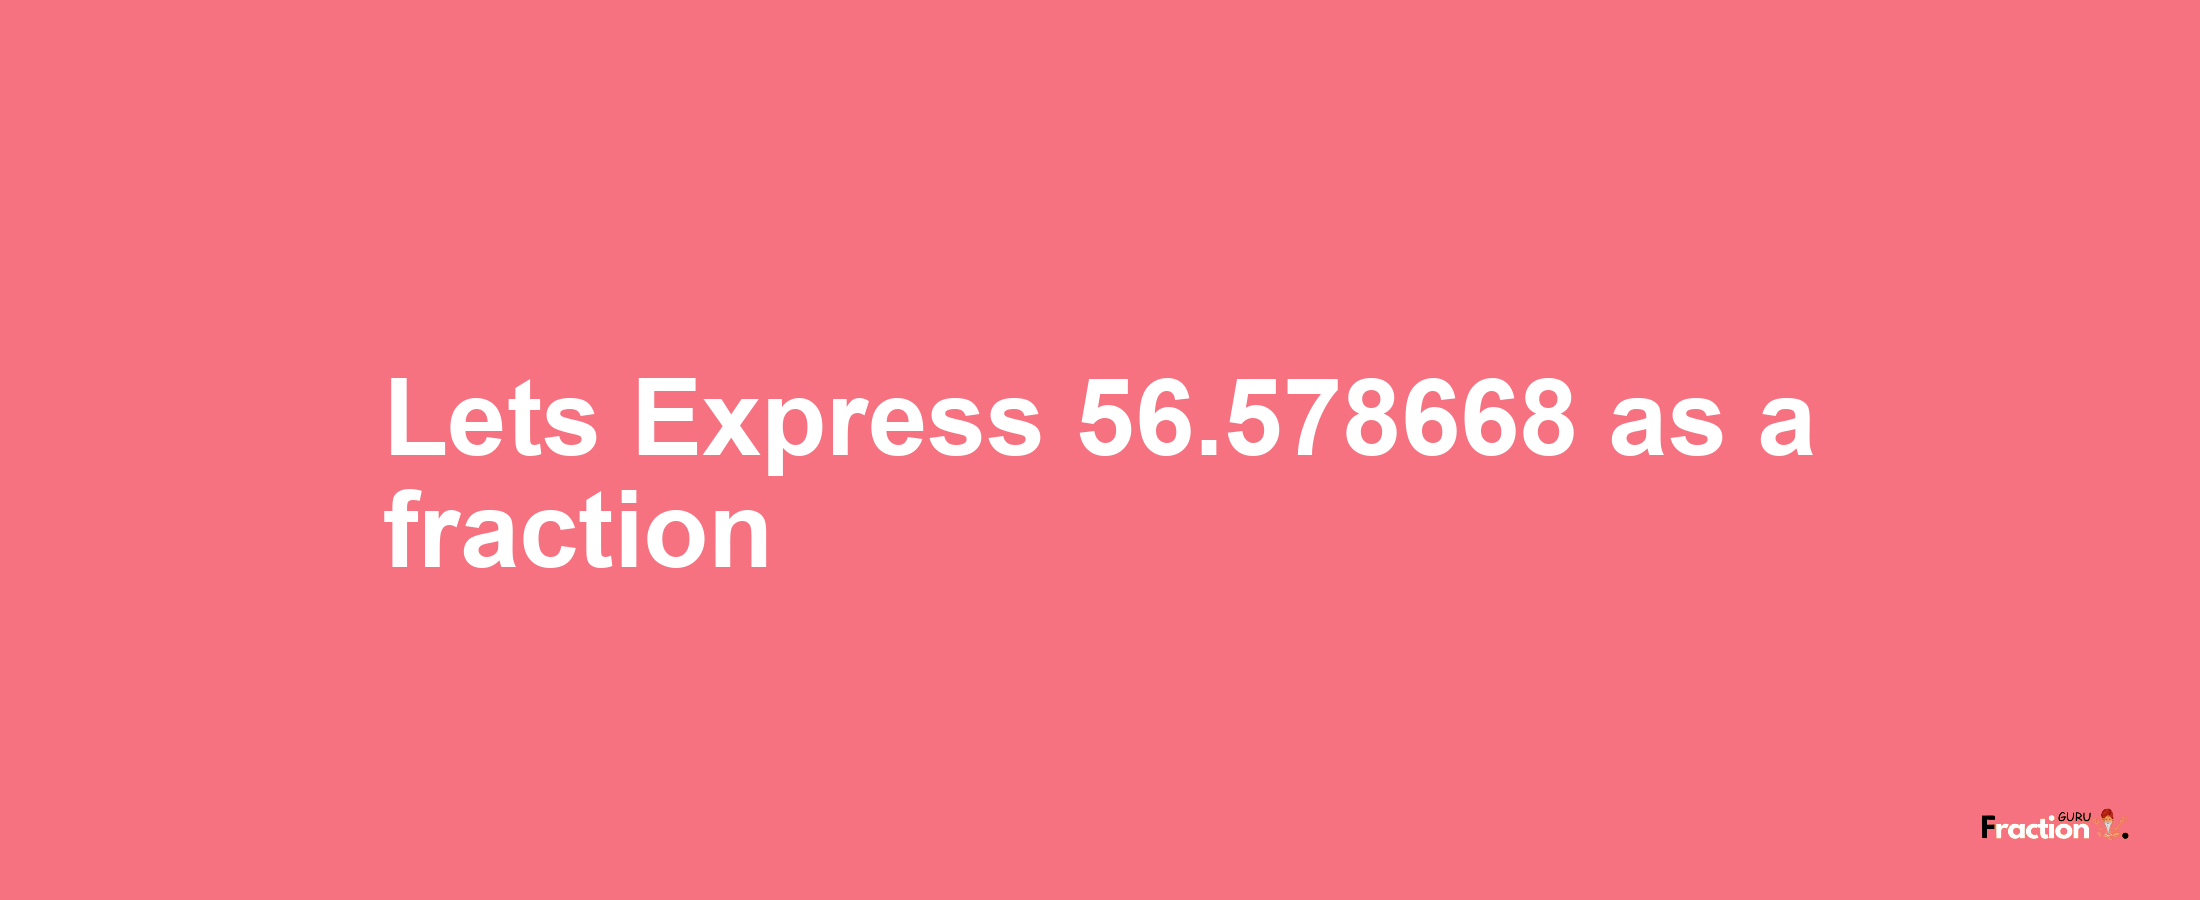 Lets Express 56.578668 as afraction